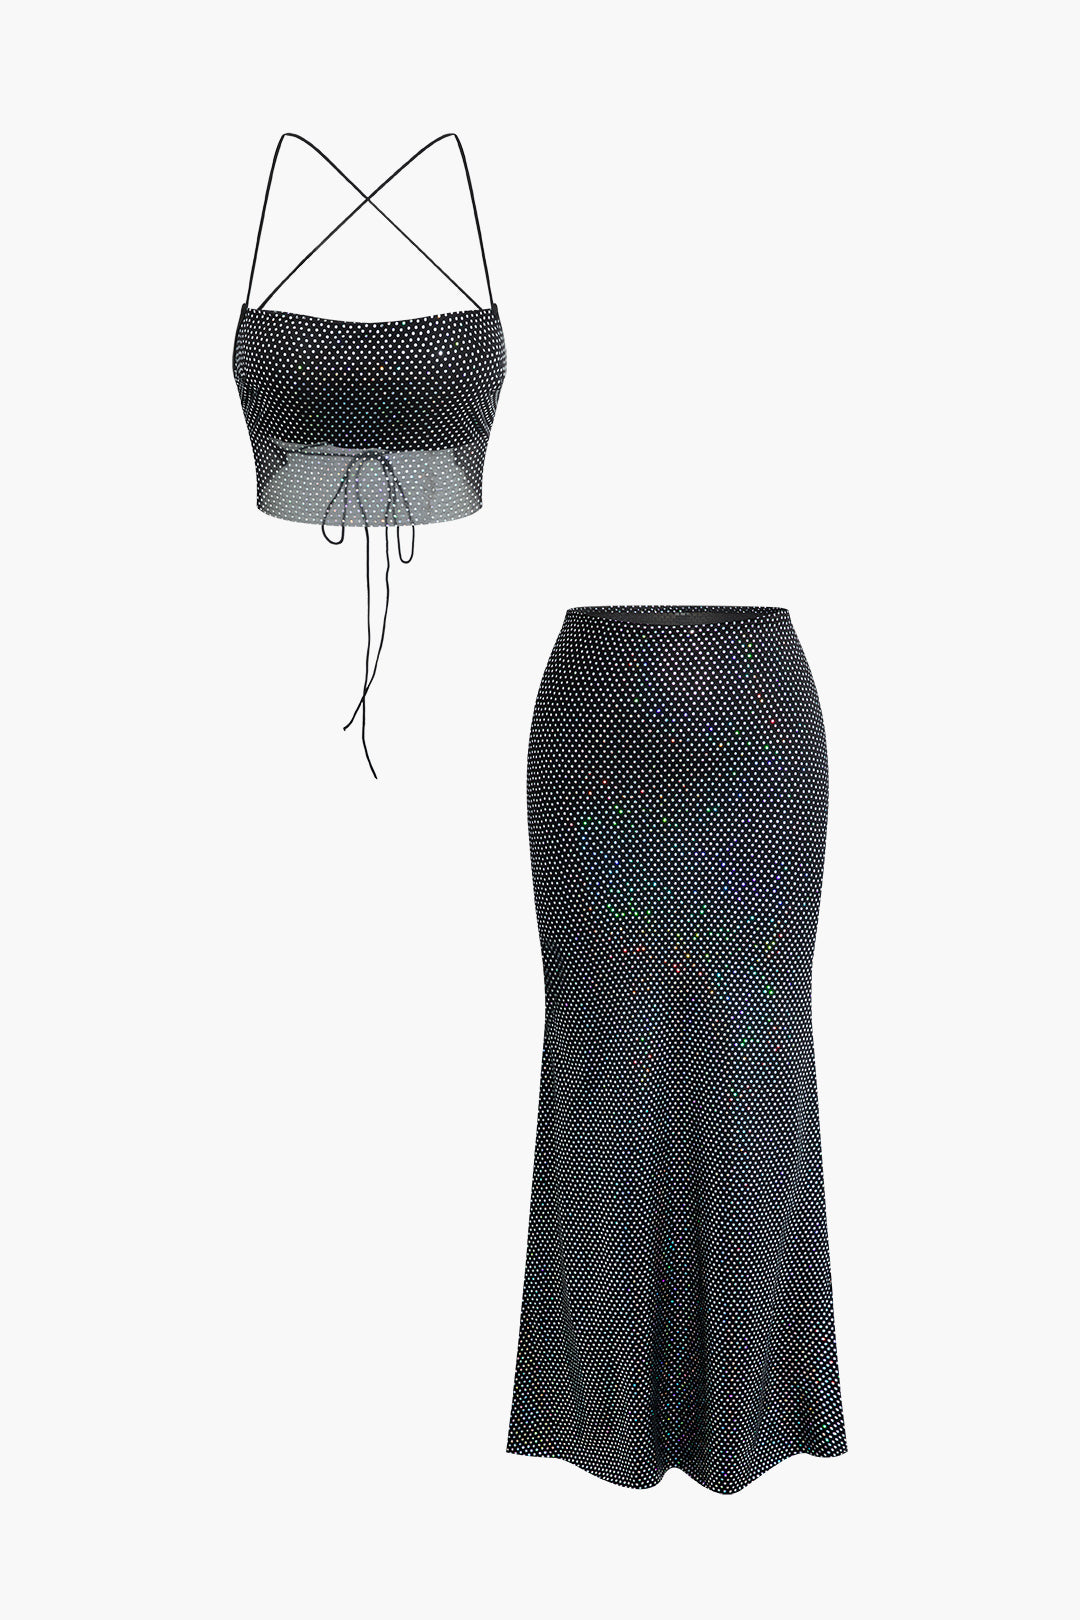 Sequin Embellished Cross Tie Back Cami Top And Mermaid Maxi Skirt Set